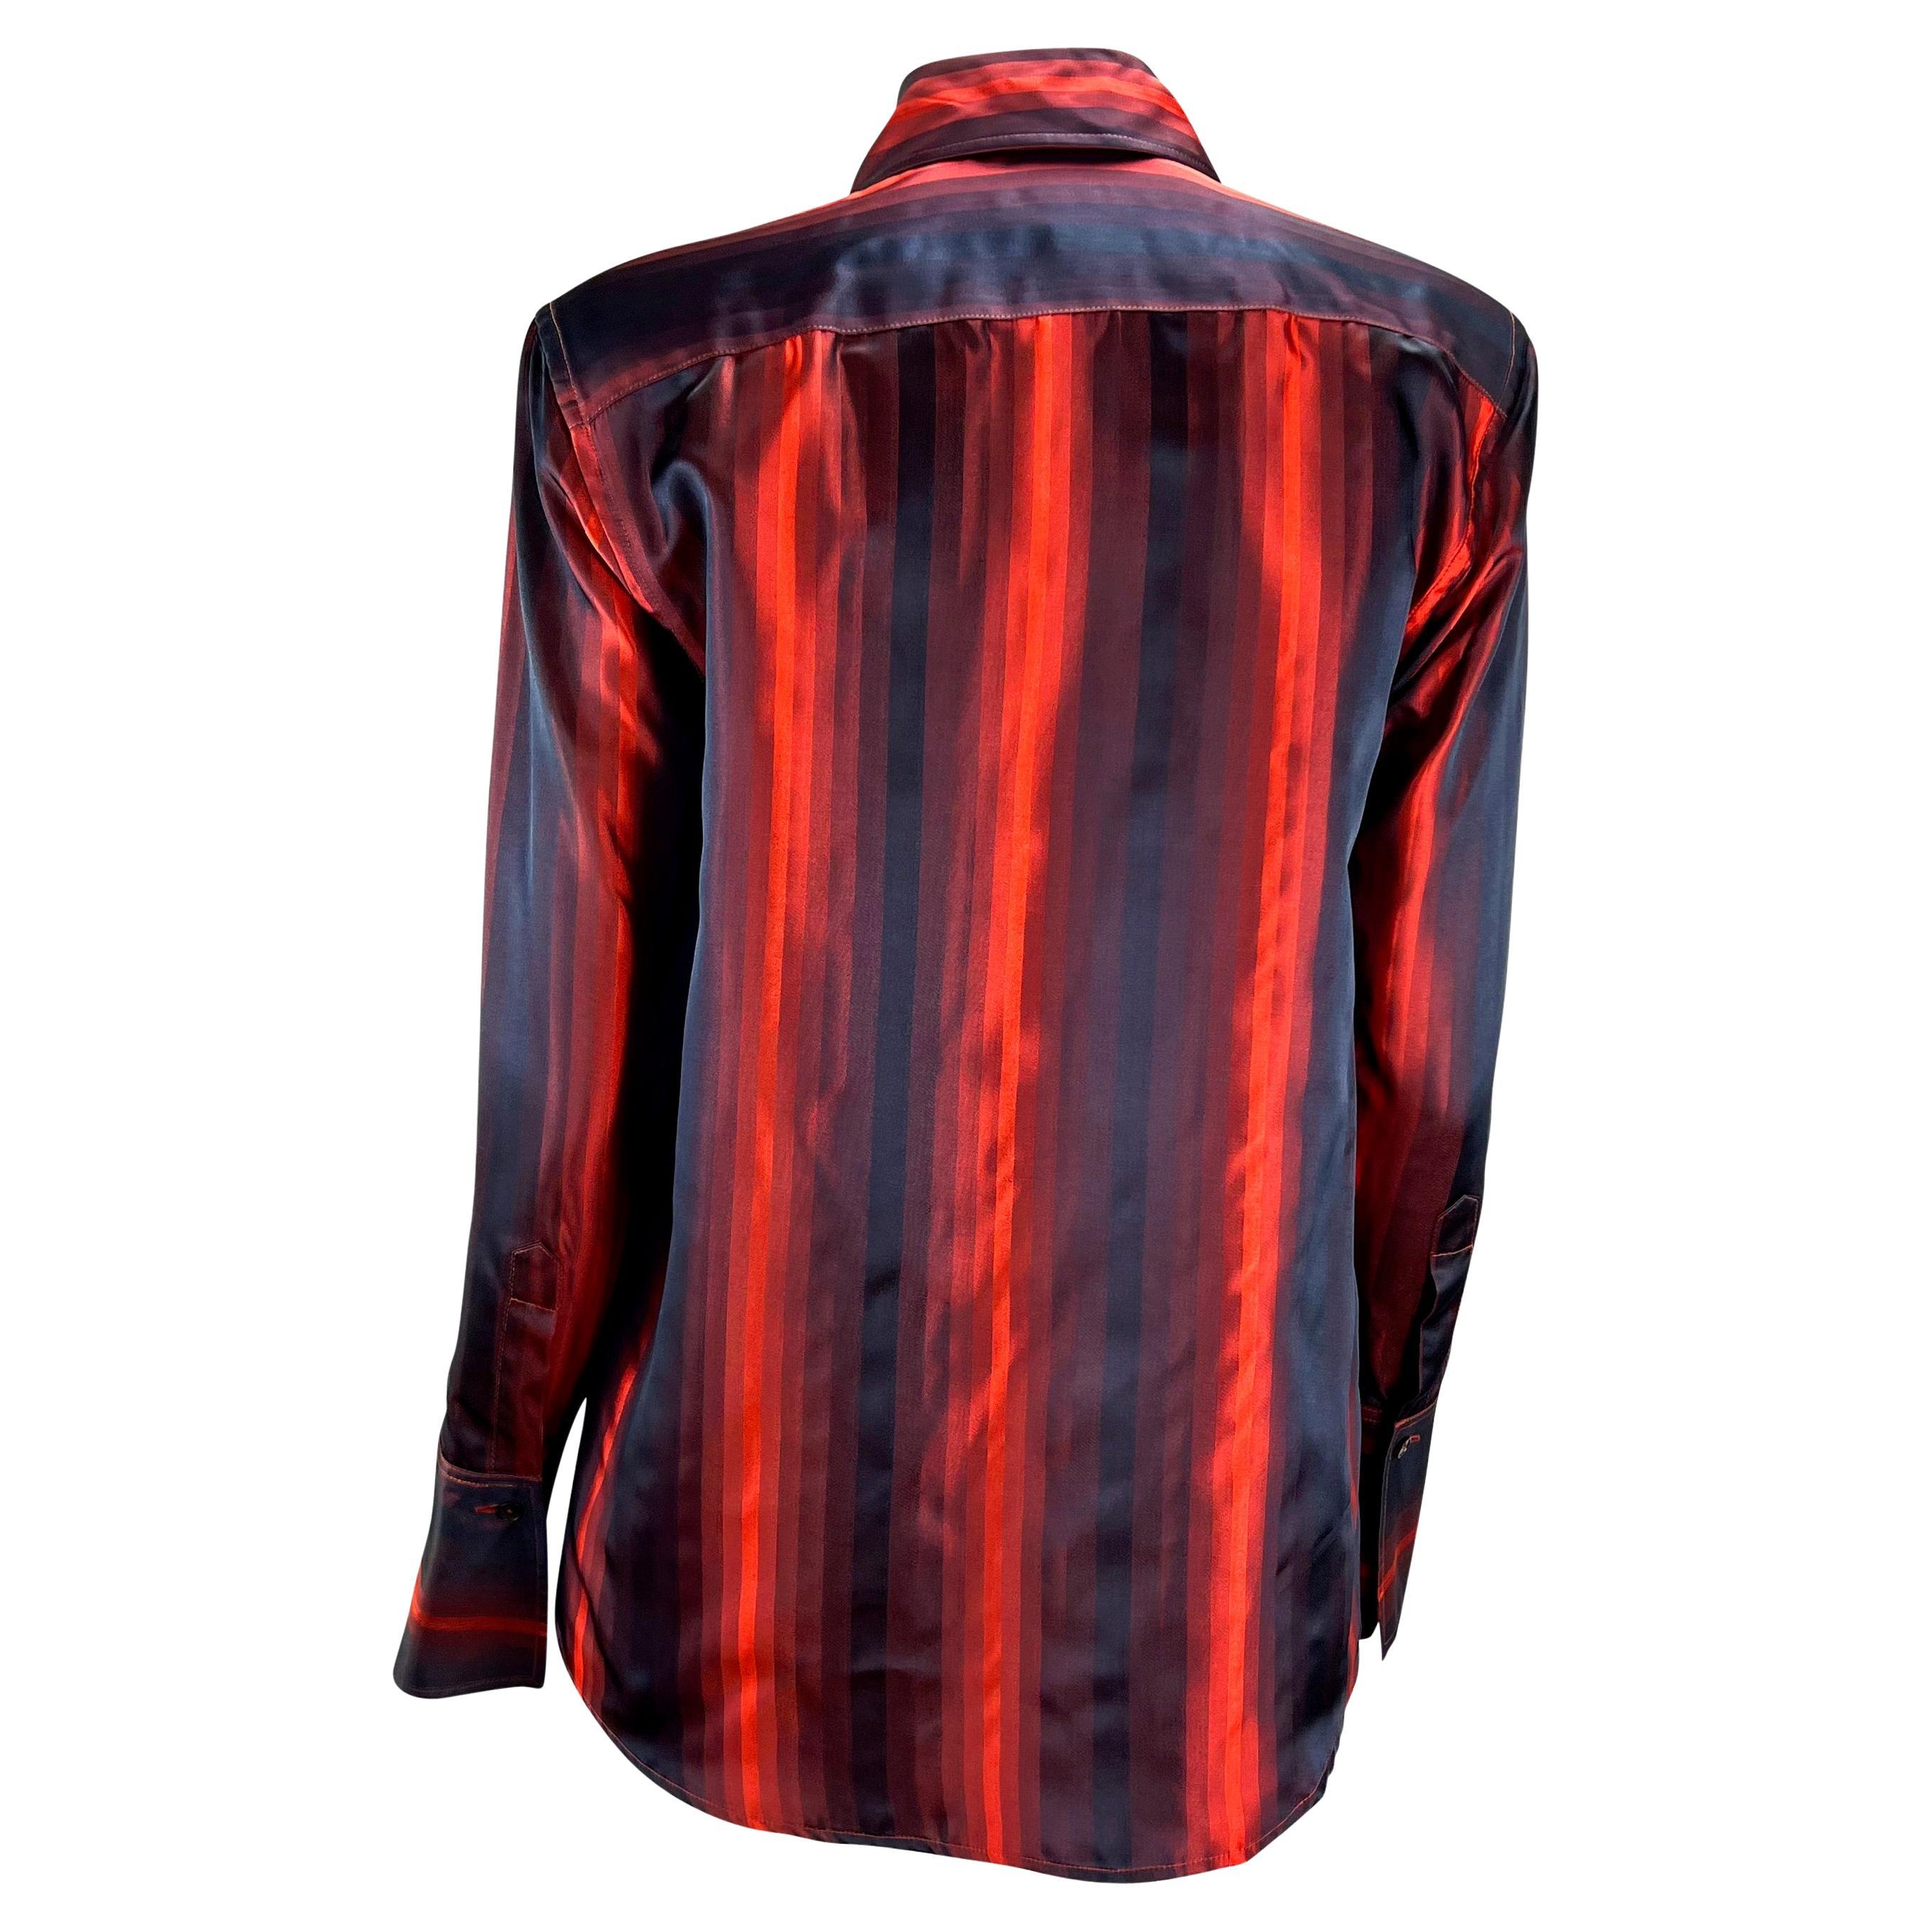 Women's F/W 1997 Gucci by Tom Ford Runway Red Ombré Stripe Button Up Shoulder Pad Top For Sale